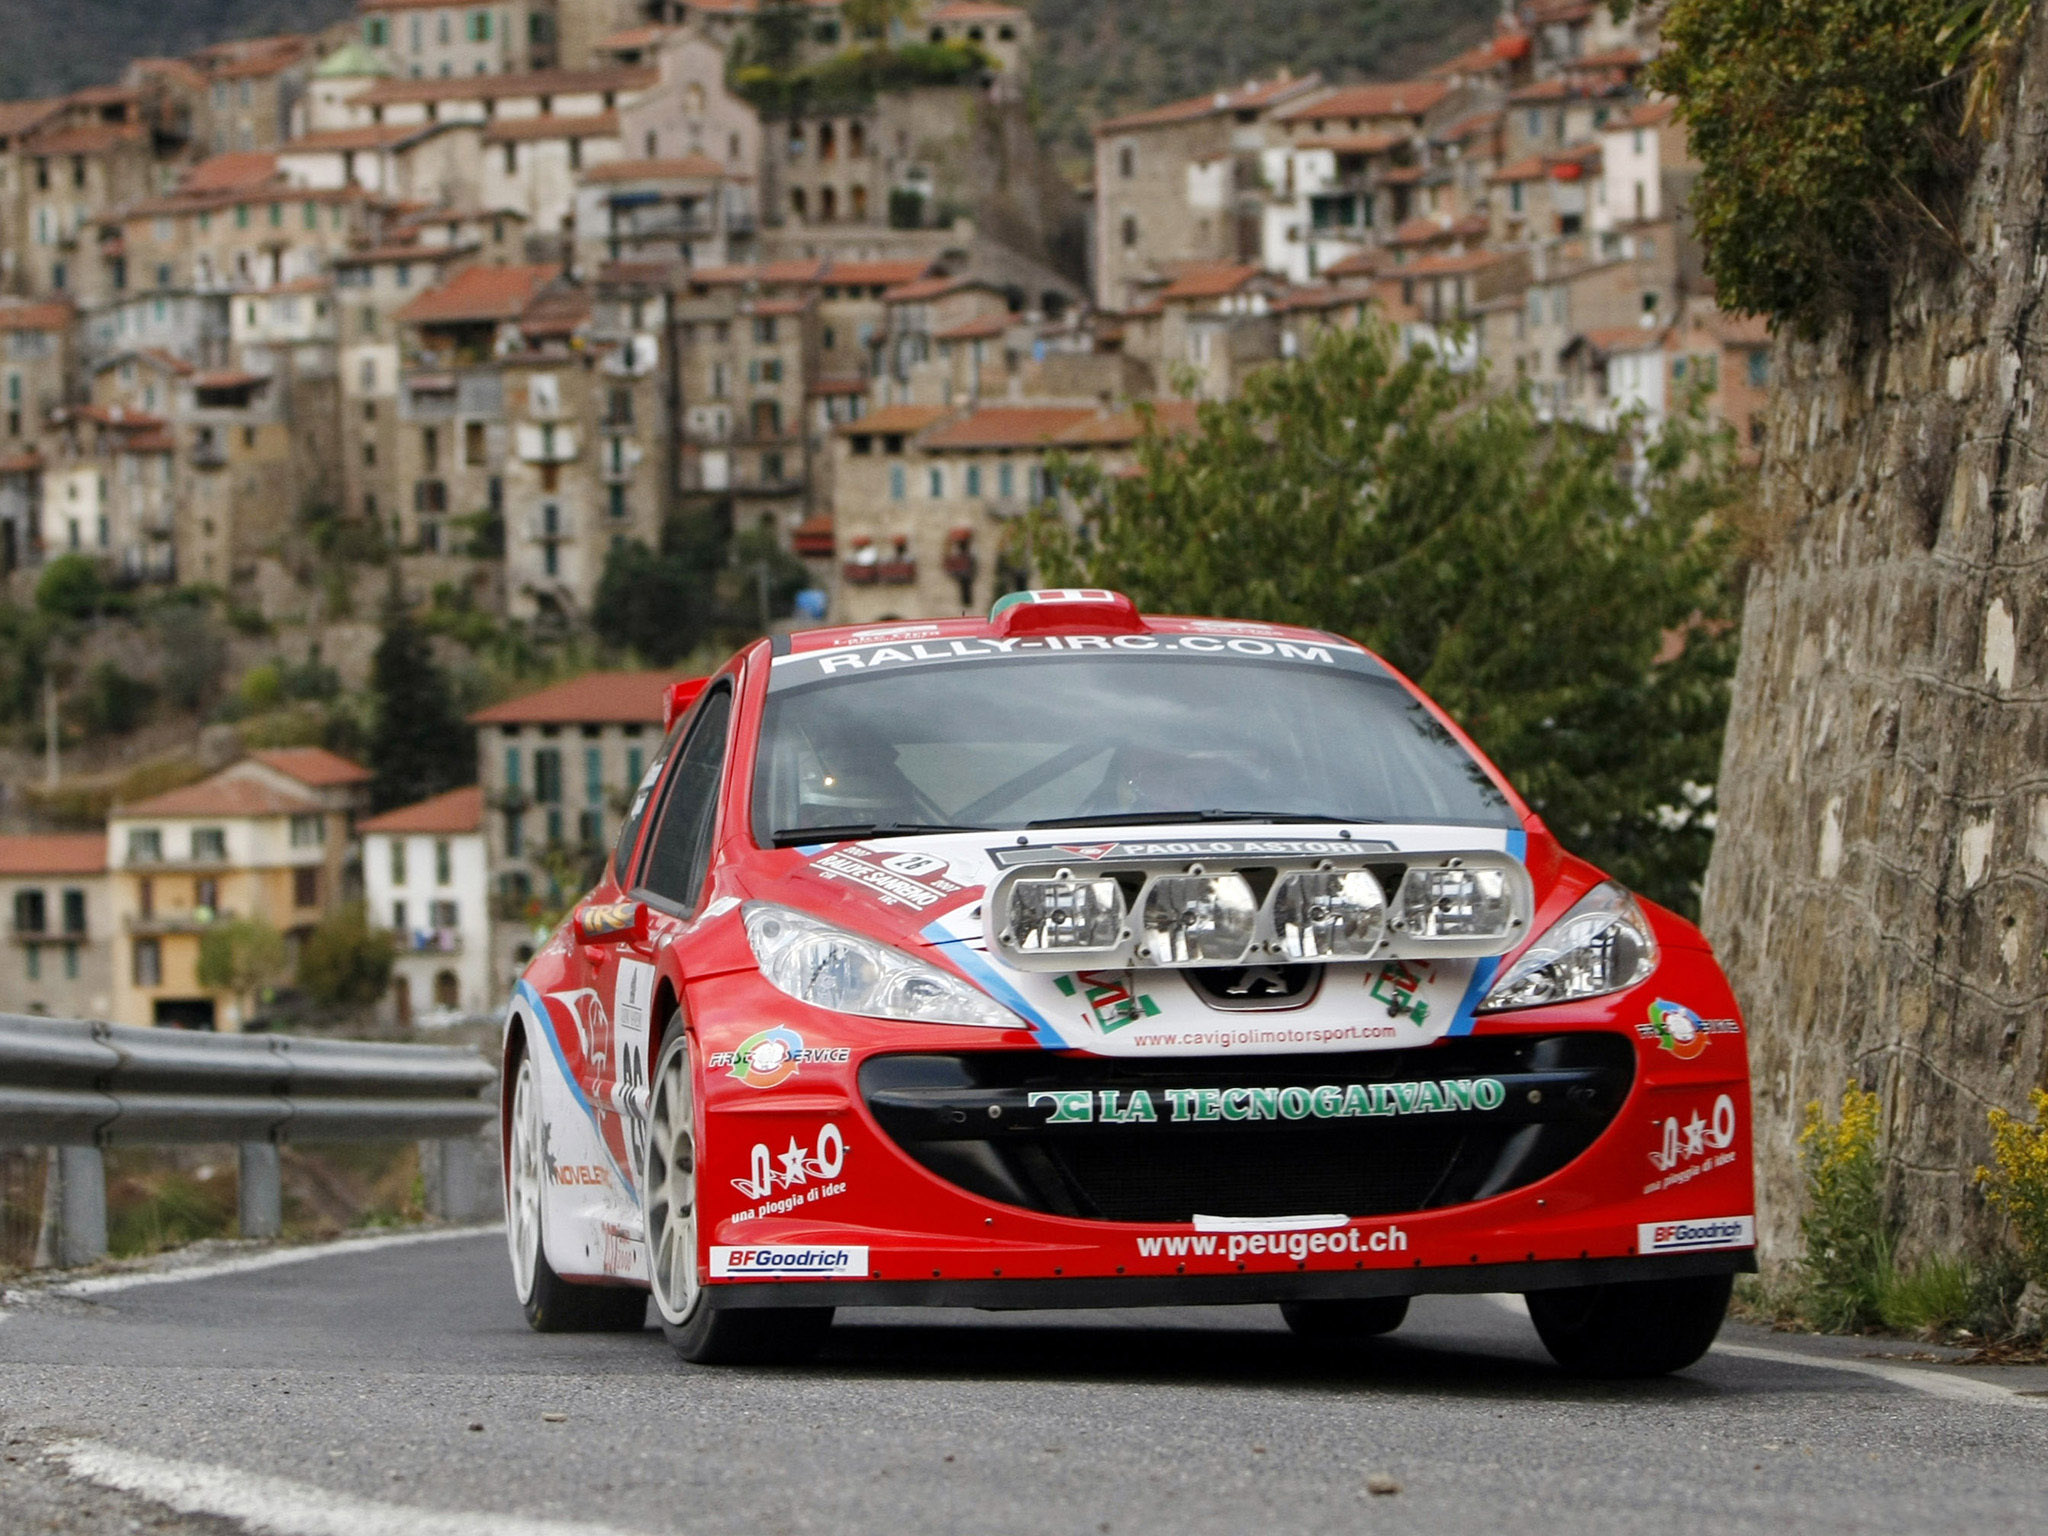 Car in pictures car photo gallery » Peugeot 207 S2000